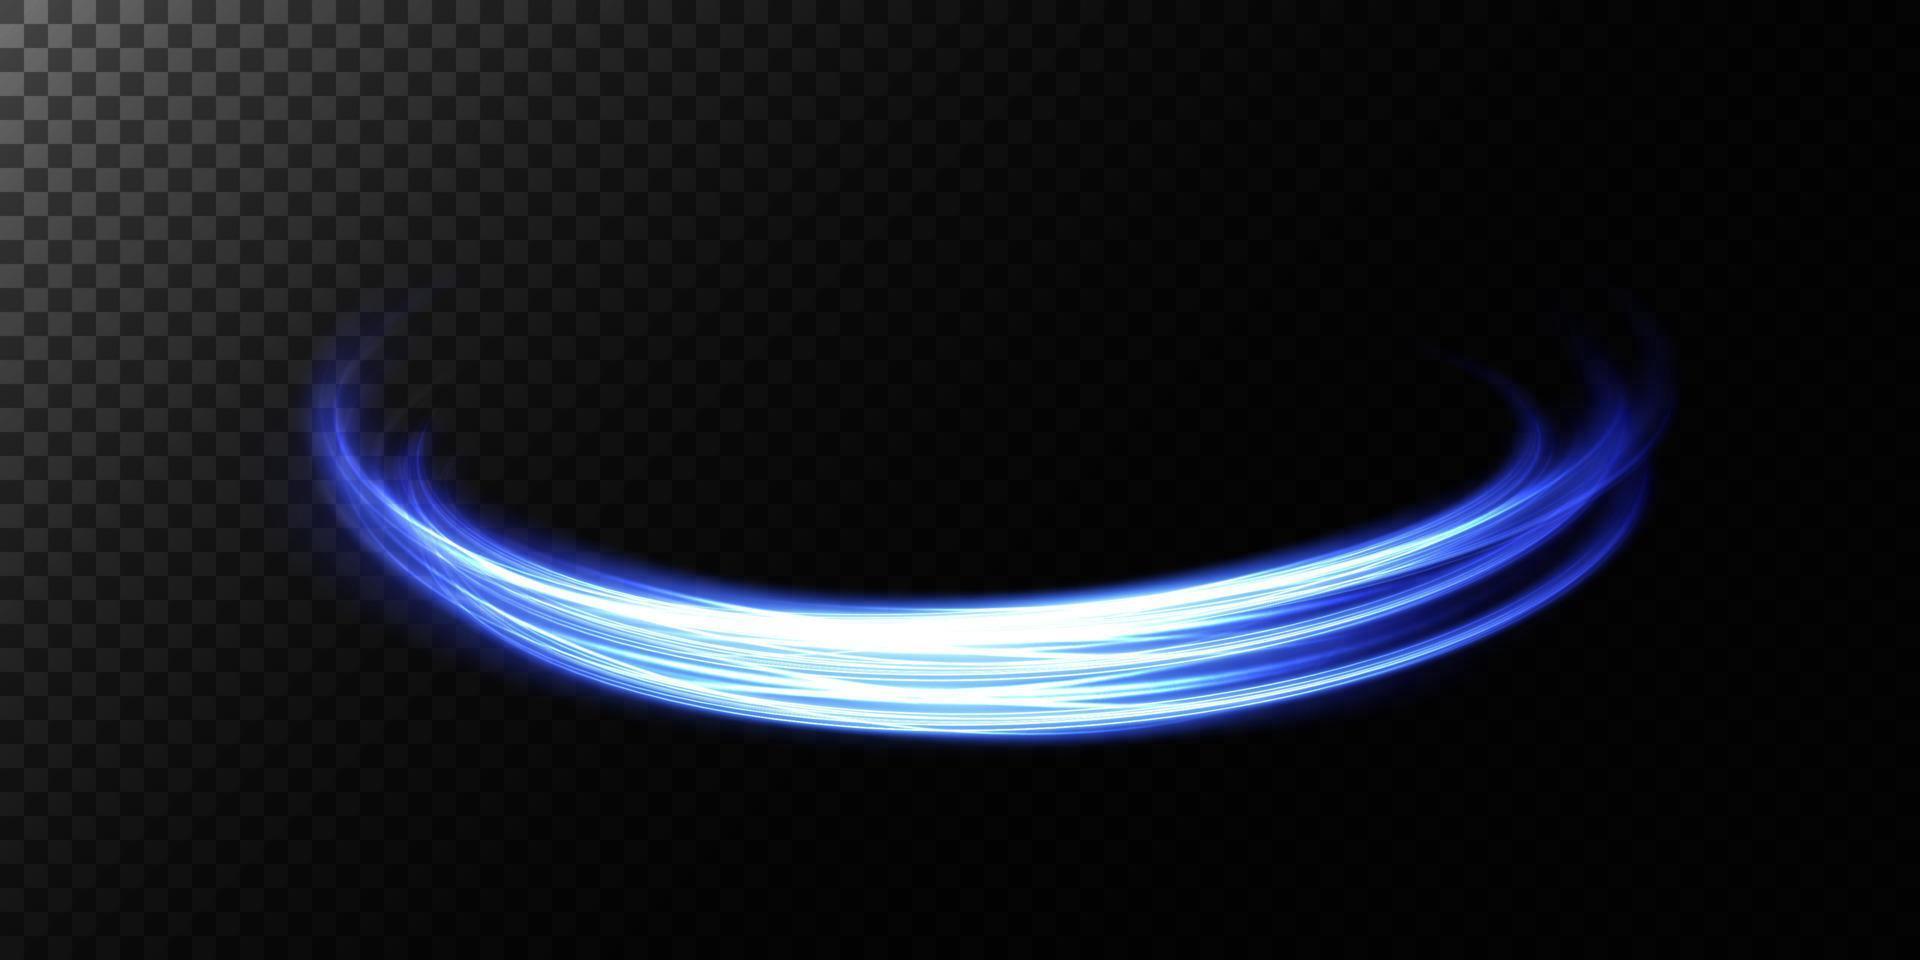 Abstract light lines of movement and speed in blue. Light everyday glowing effect. semicircular wave, light trail curve swirl, car headlights, incandescent optical fiber png. vector